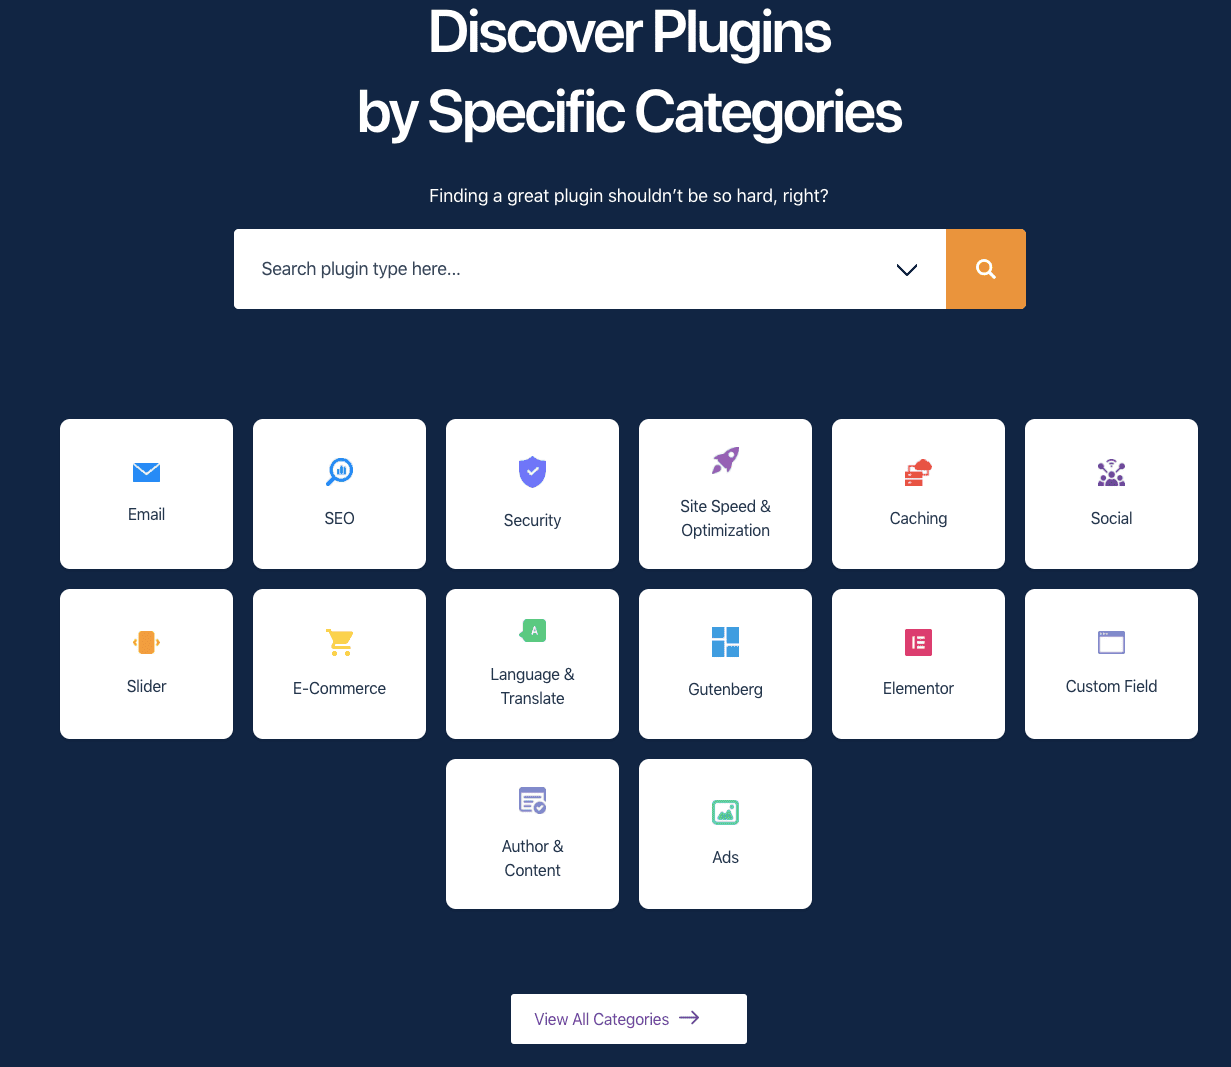 Discover Plugins by specific categories illustration